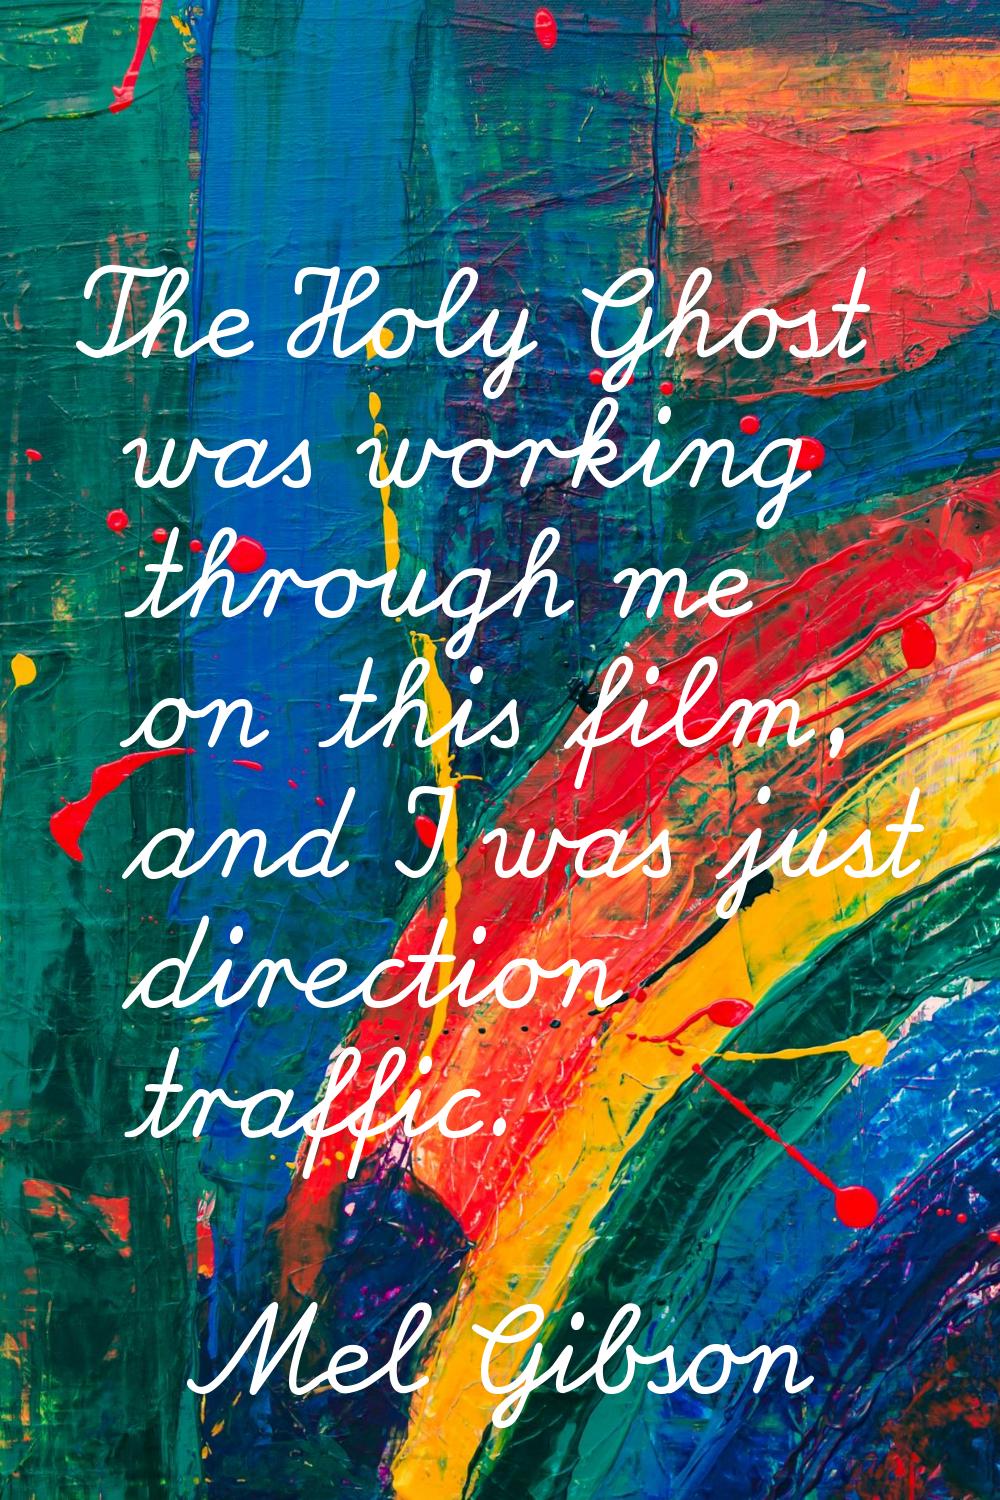 The Holy Ghost was working through me on this film, and I was just direction traffic.